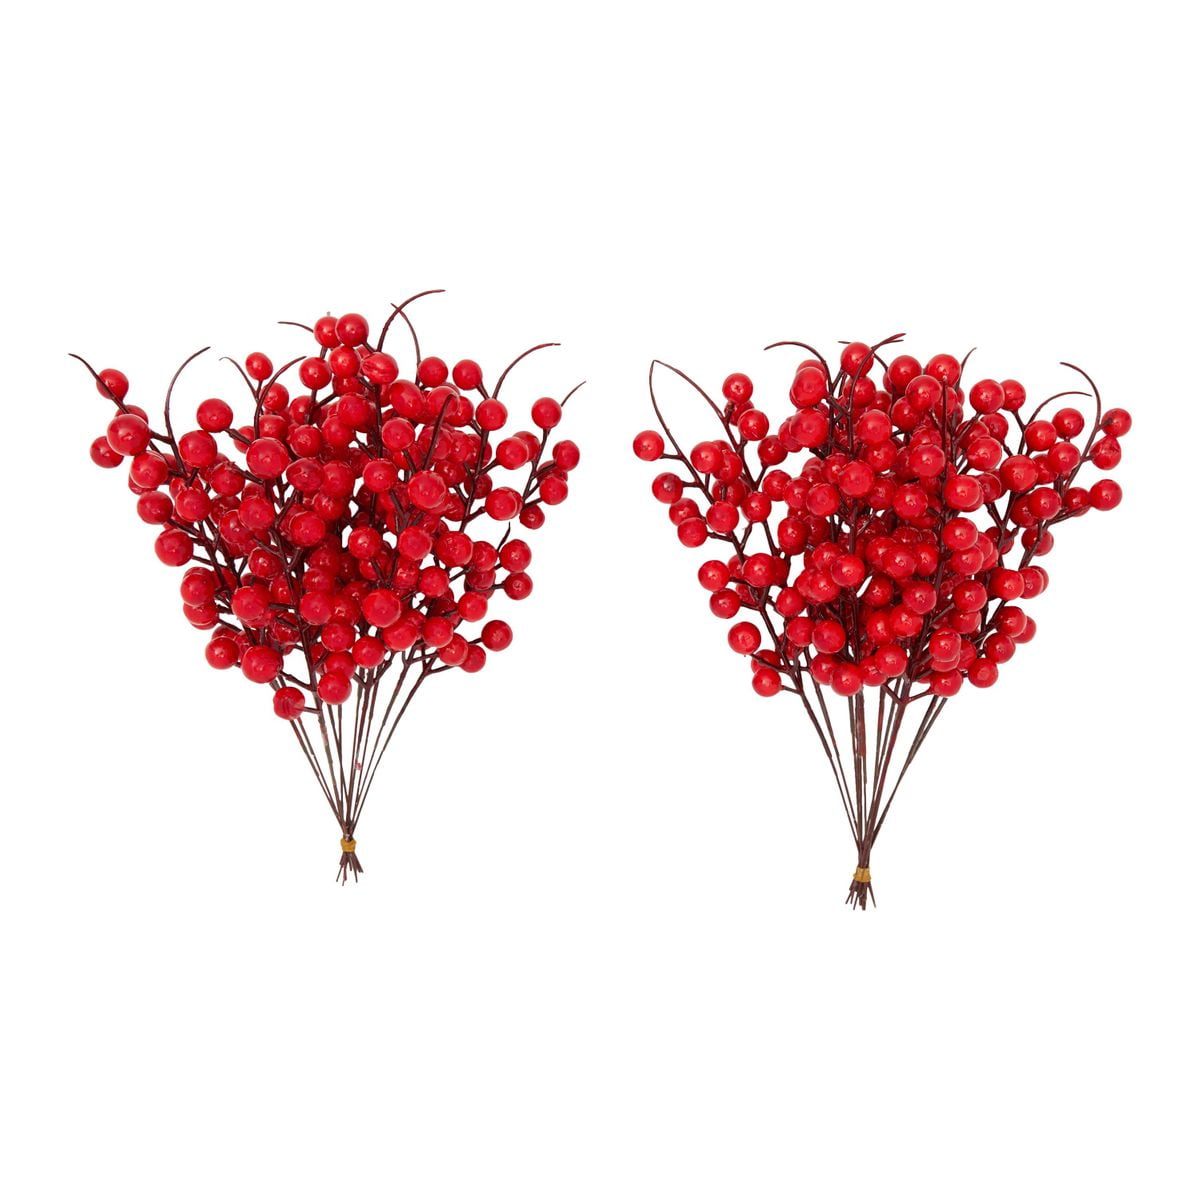 Autumn Office Home Decor Artificial Red Berry Spray Stem Of Faux Berries Leaves 